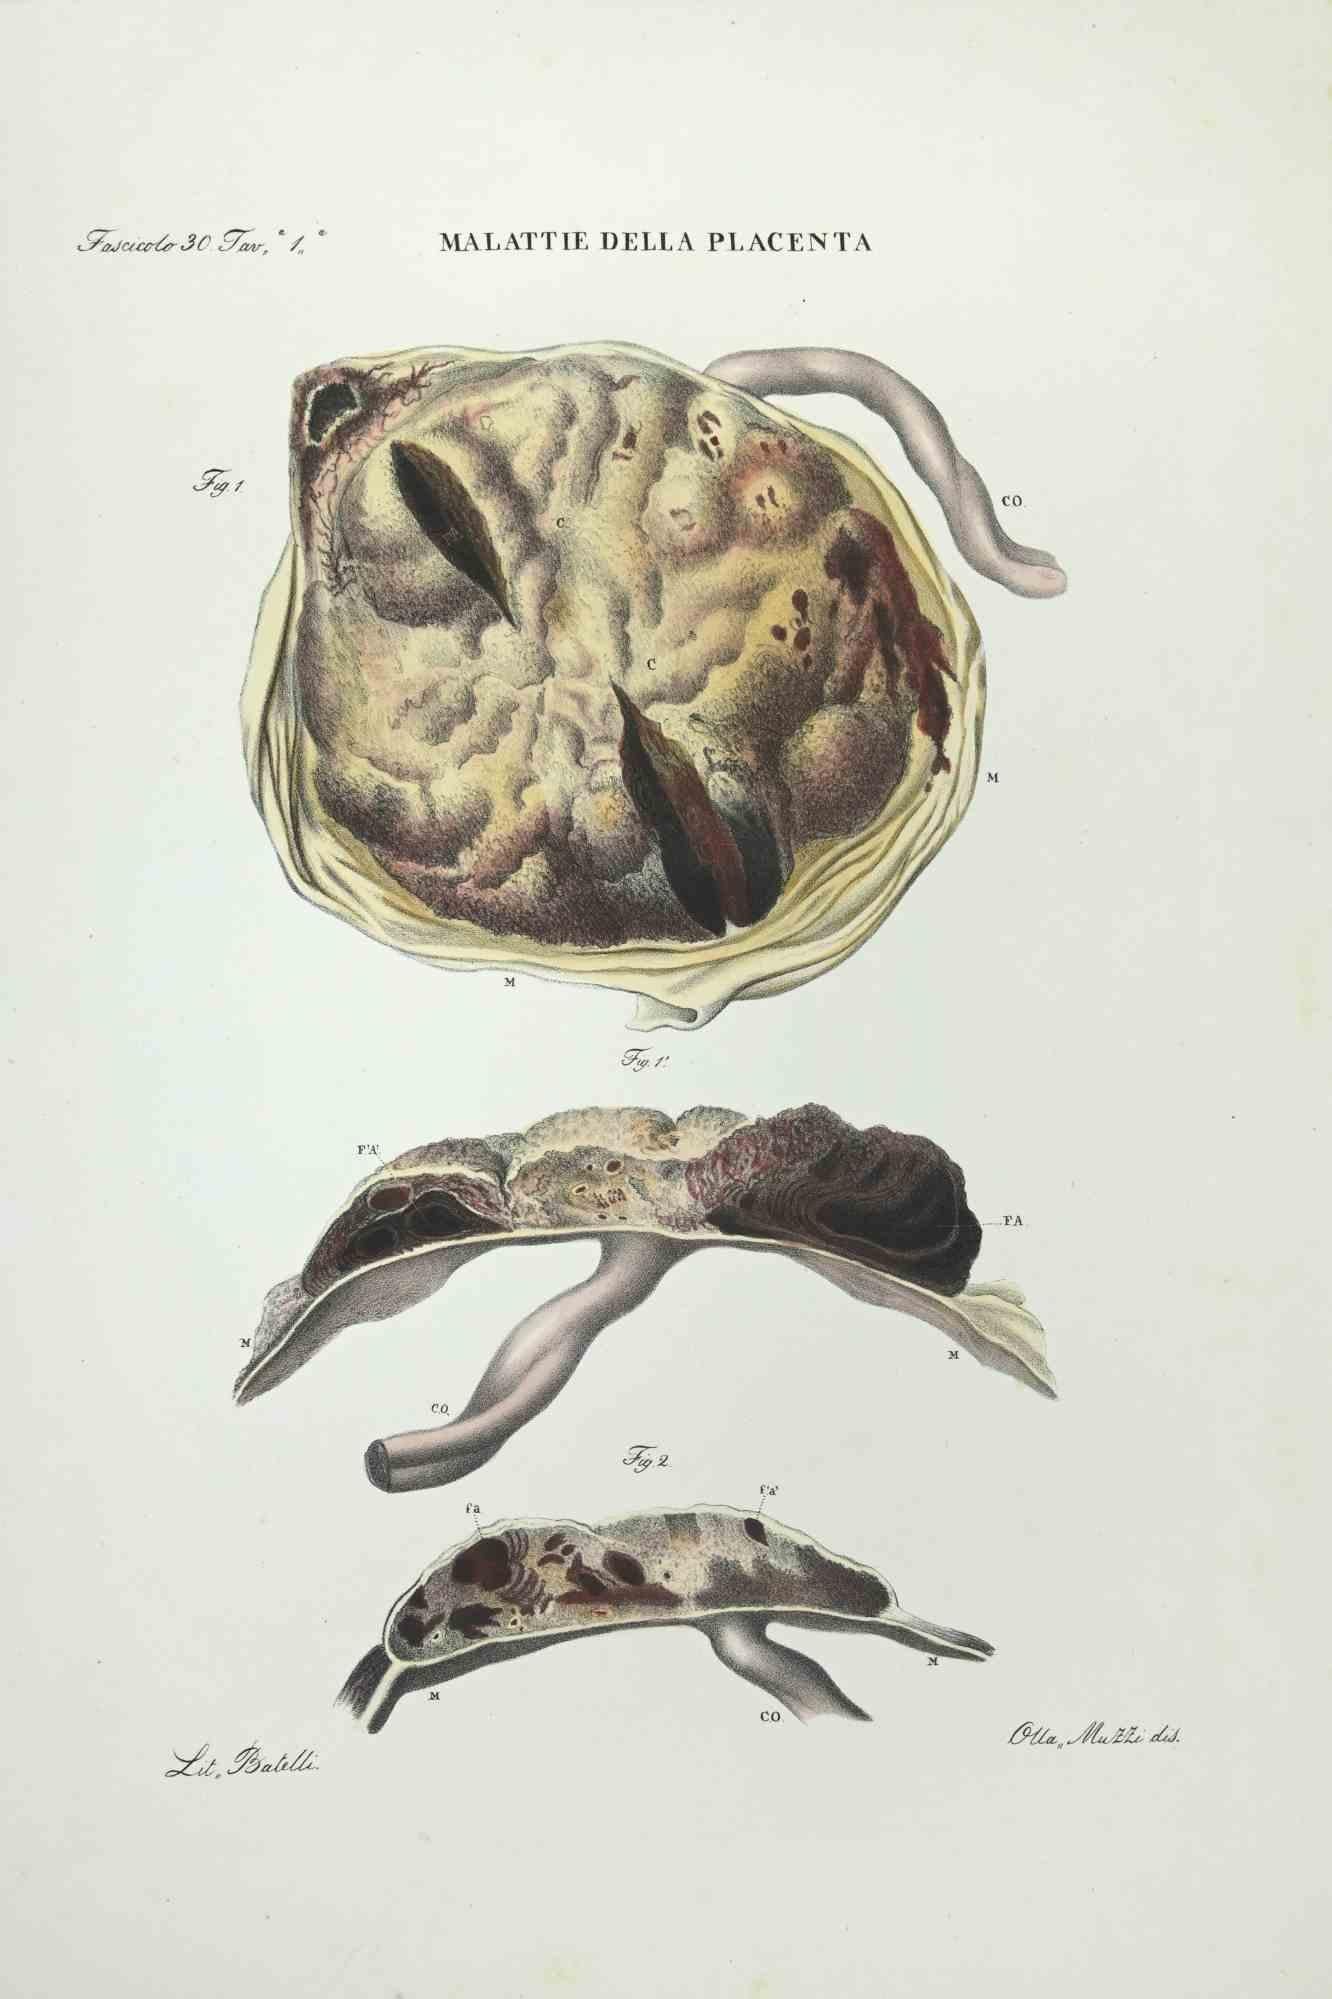 Placenta Diseases is a lithograph hand colored by Ottavio Muzzi for the edition of Antoine Chazal,Human Anatomy, Printers Batelli and Ridolfi, realized in 1843.

Signed on plate on the lower left margin.